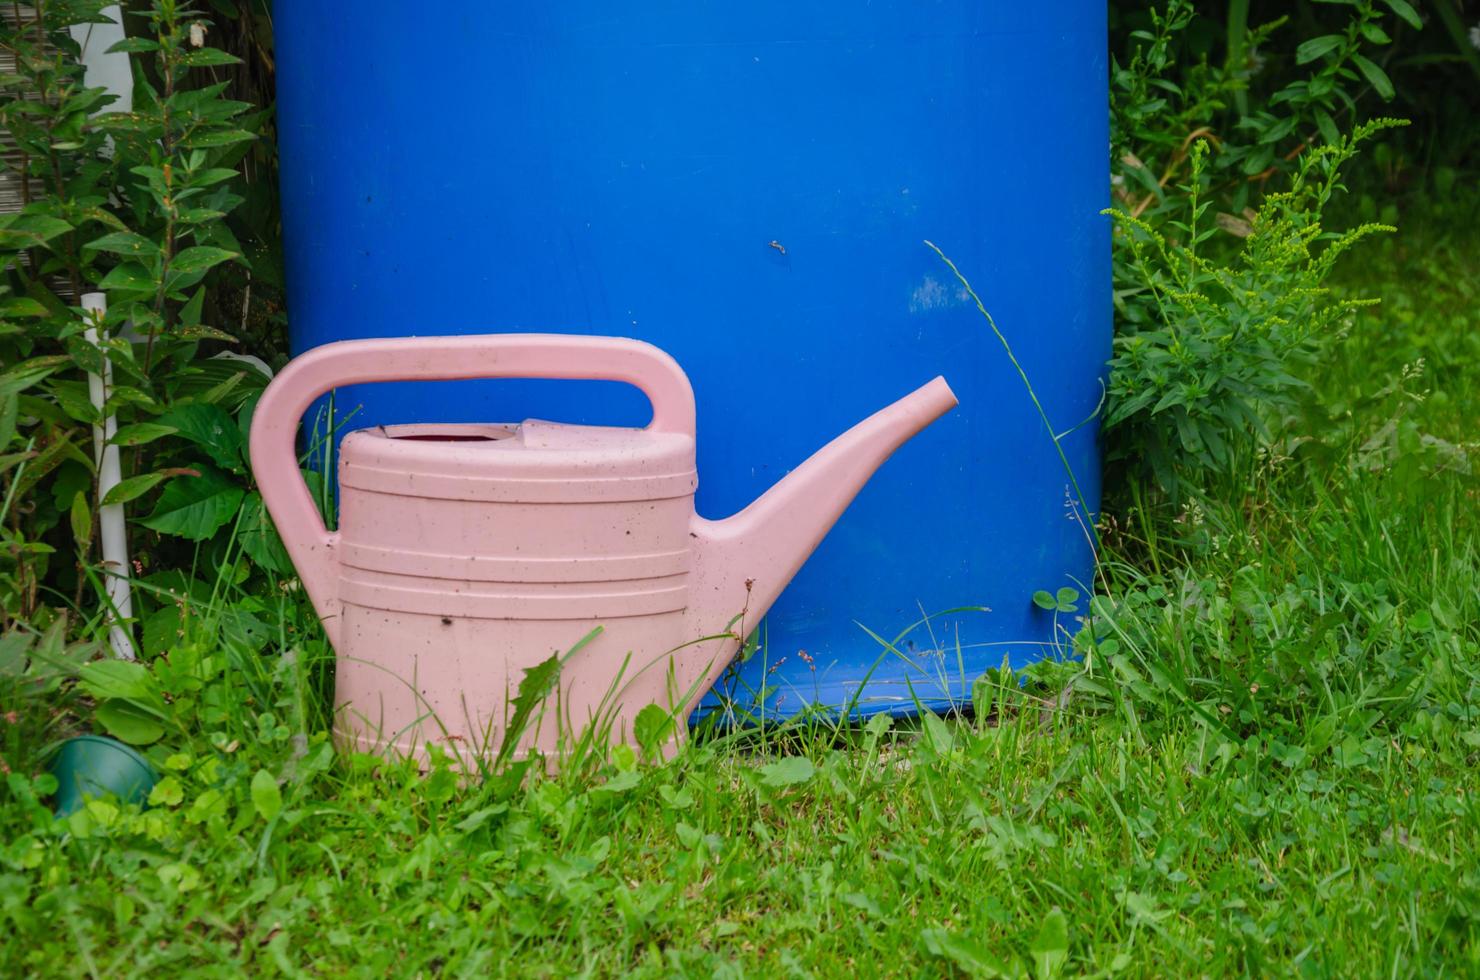 watering can for watering the garden, vegetable garden on the grass photo